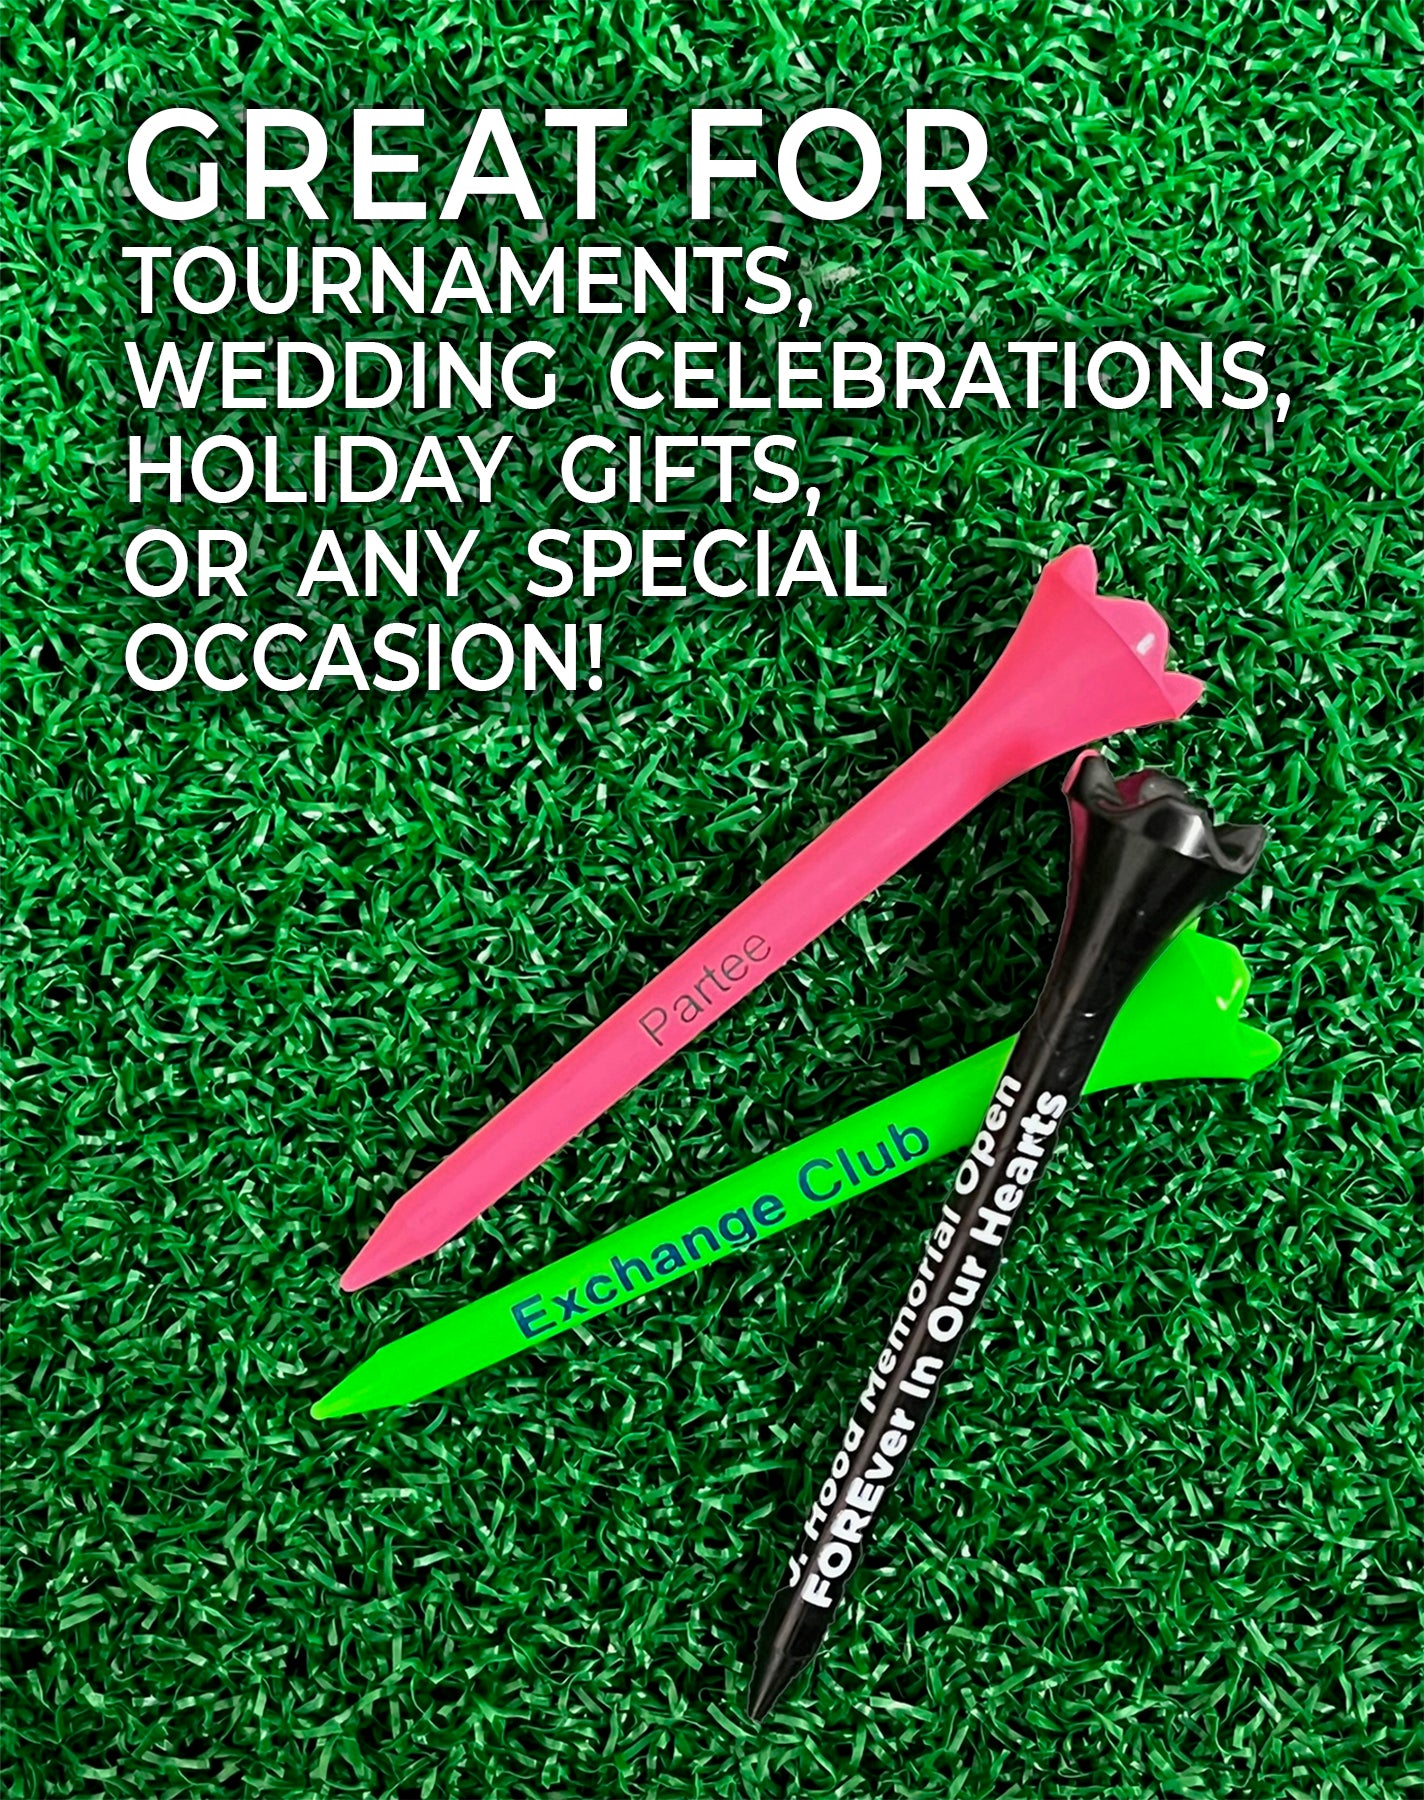 Personalized Combo Packs - 10 Pride Performance Golf Tees